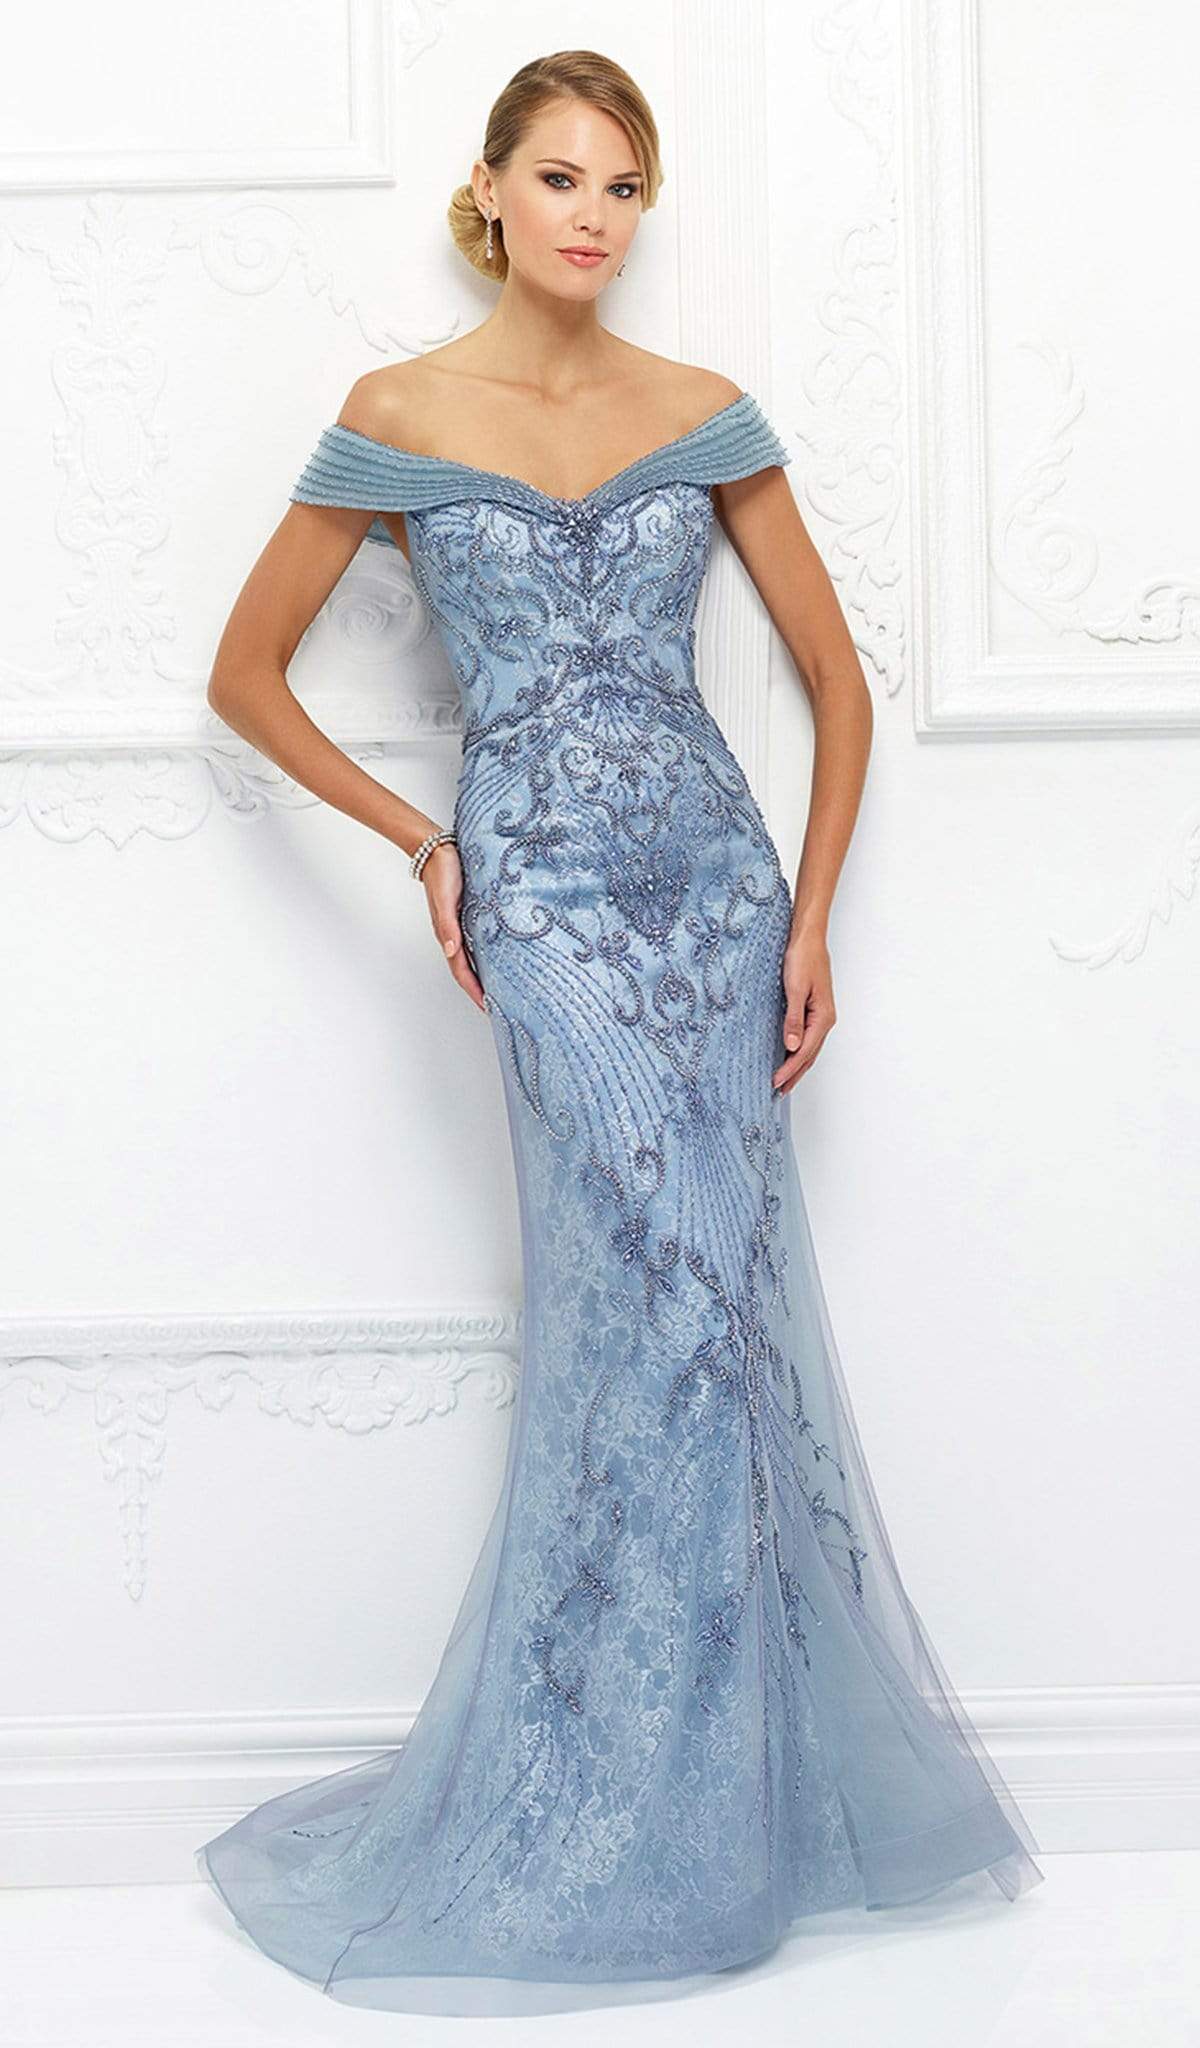 Mon Cheri - Beaded Lace Dress With Tulle Overlay 118D08 In Blue